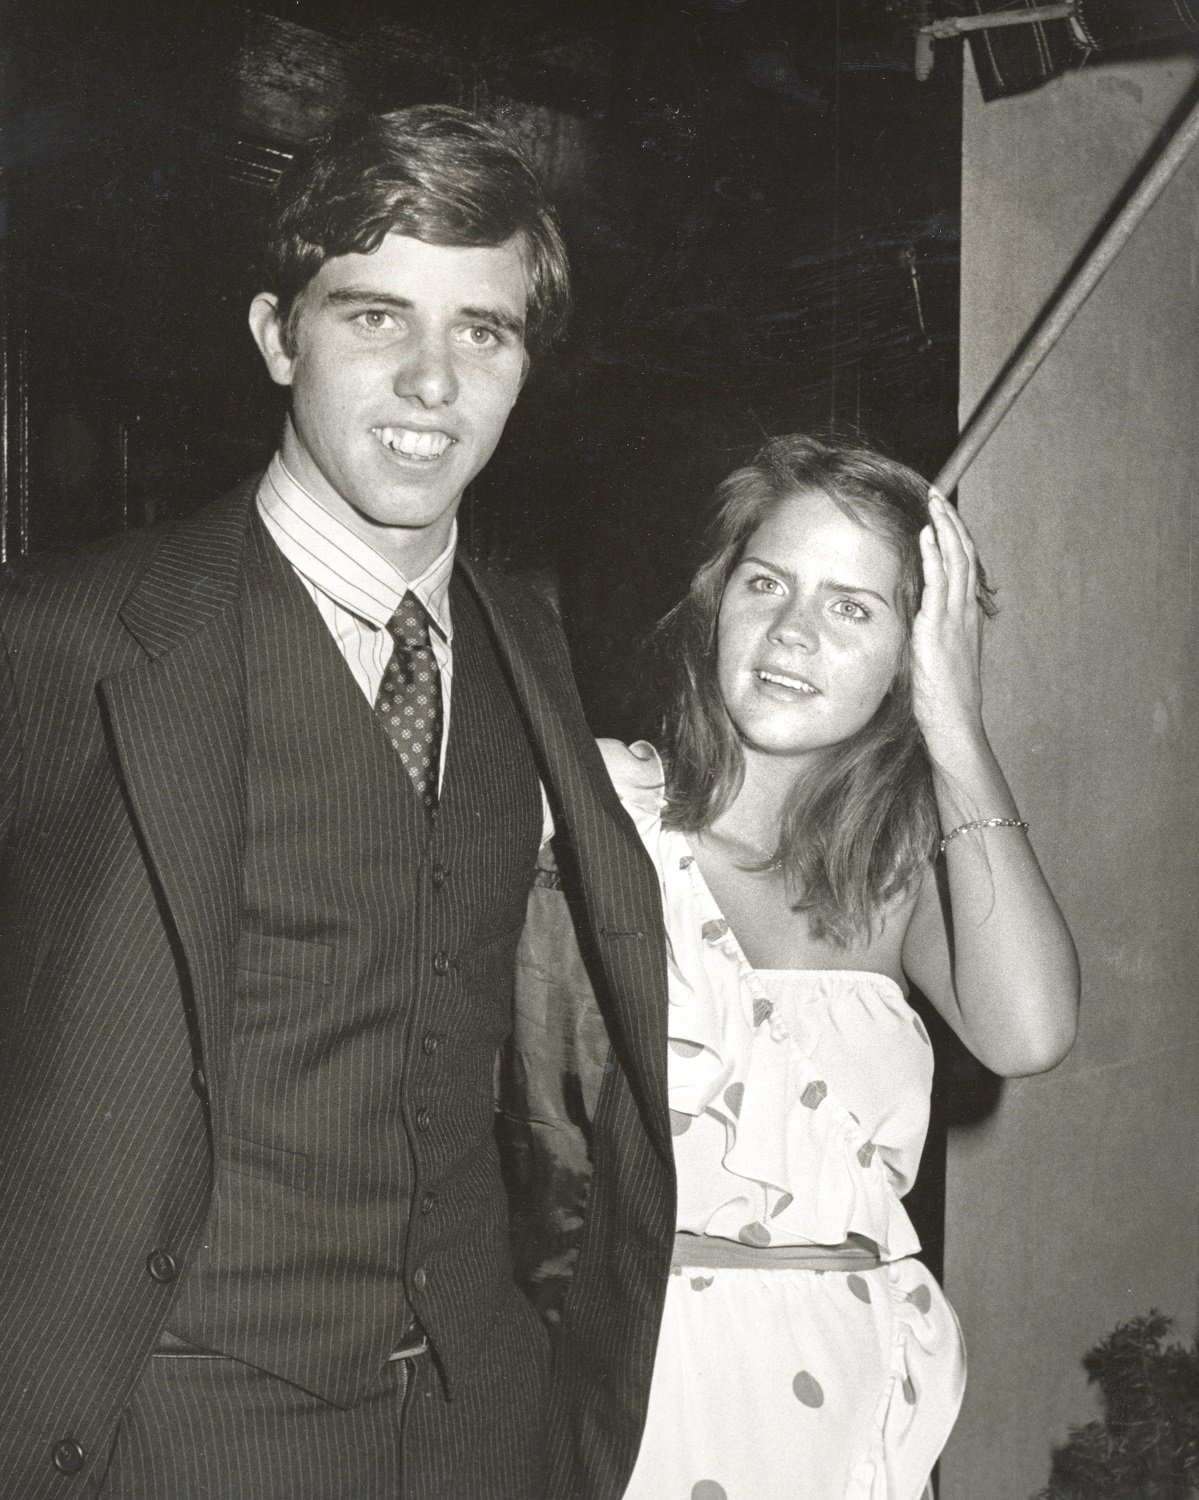 Michael Kennedy and Victoria Gifford attend their engagement party